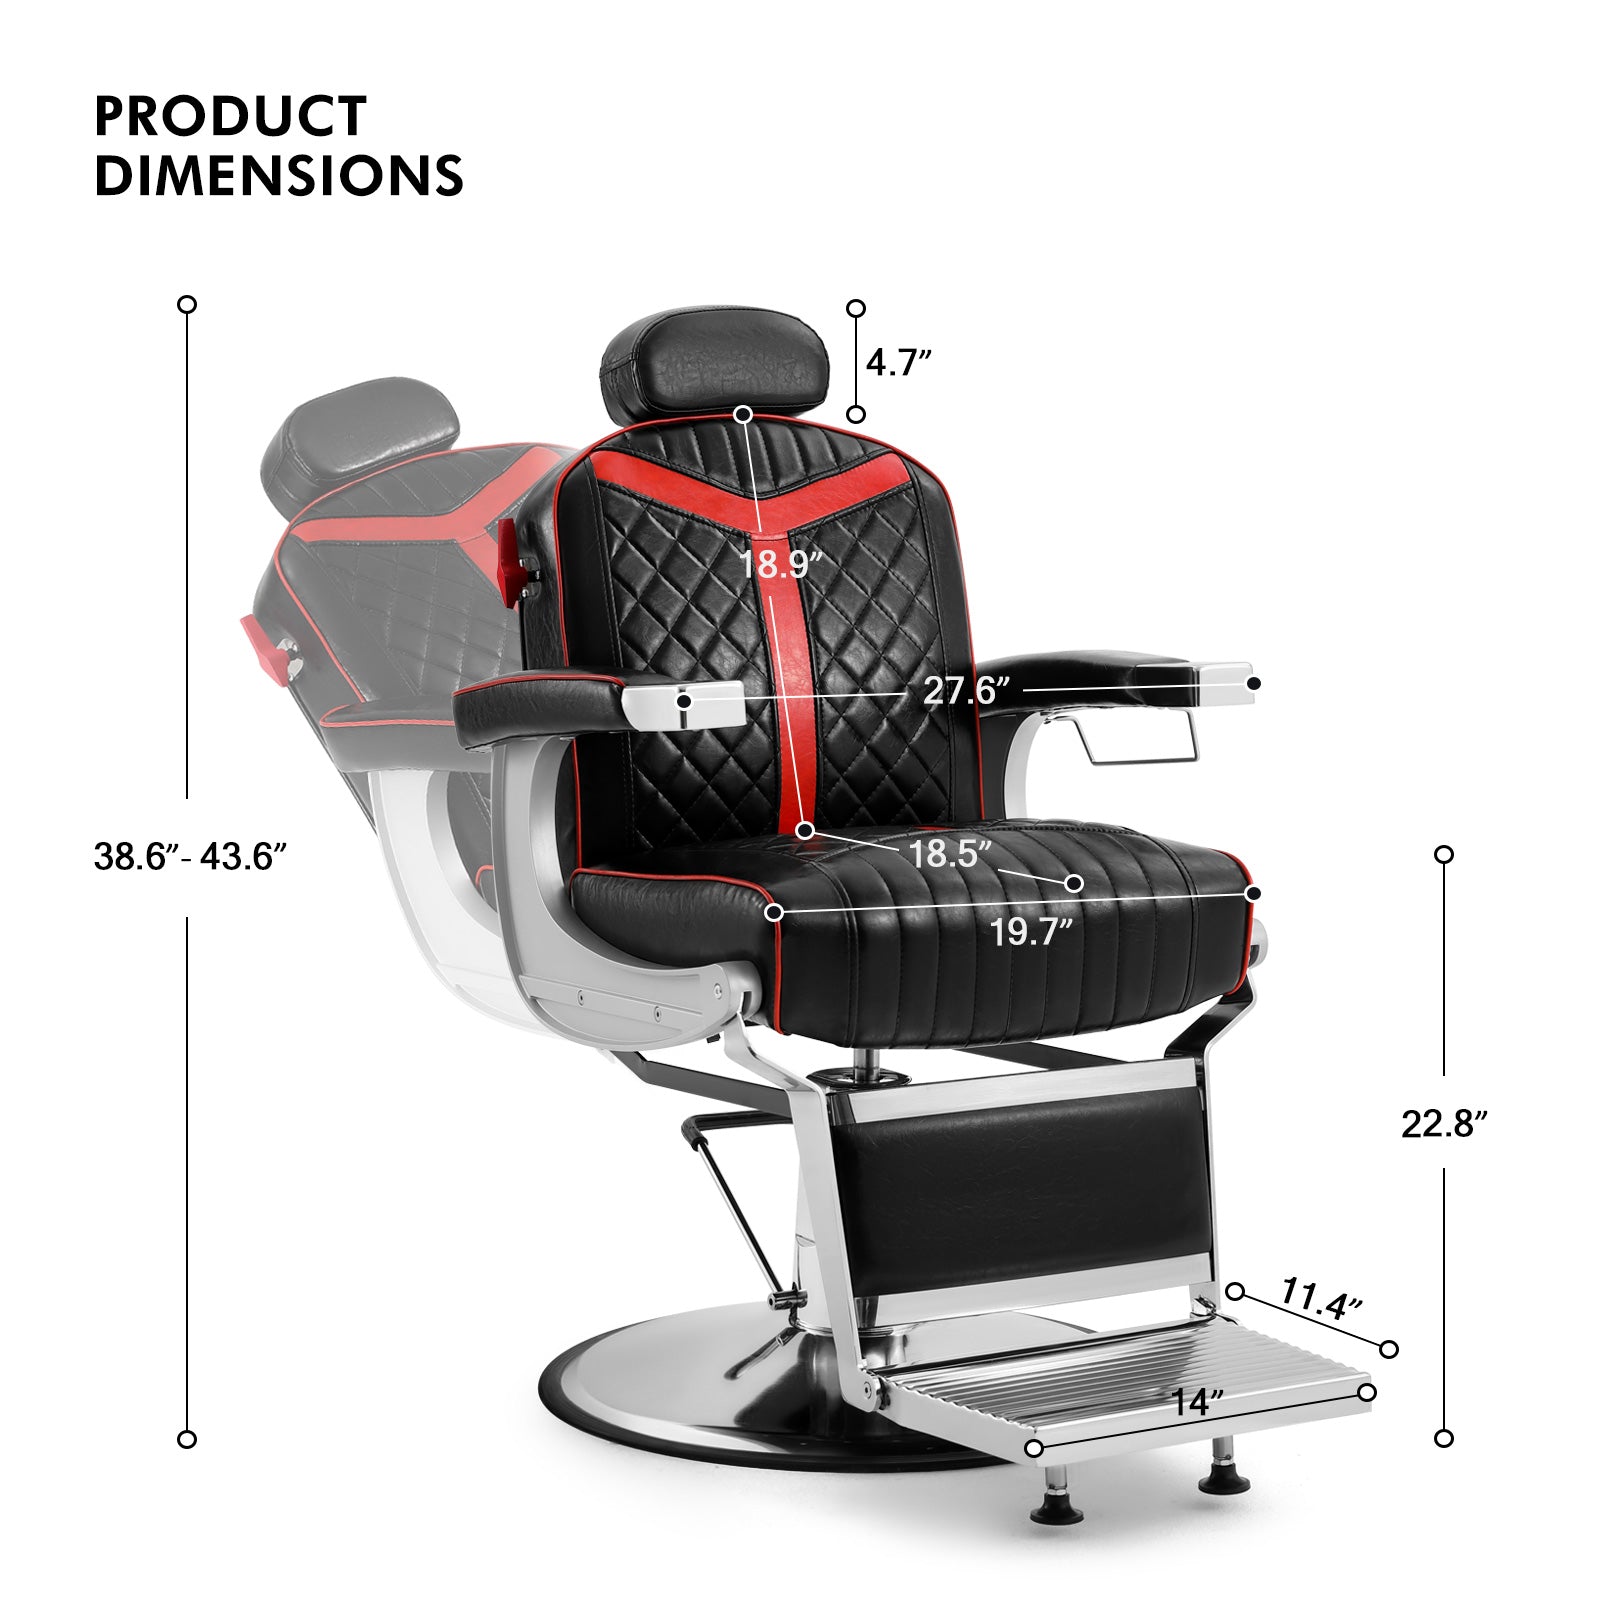 #5063 Barber Chair with Unique Backrest Lever